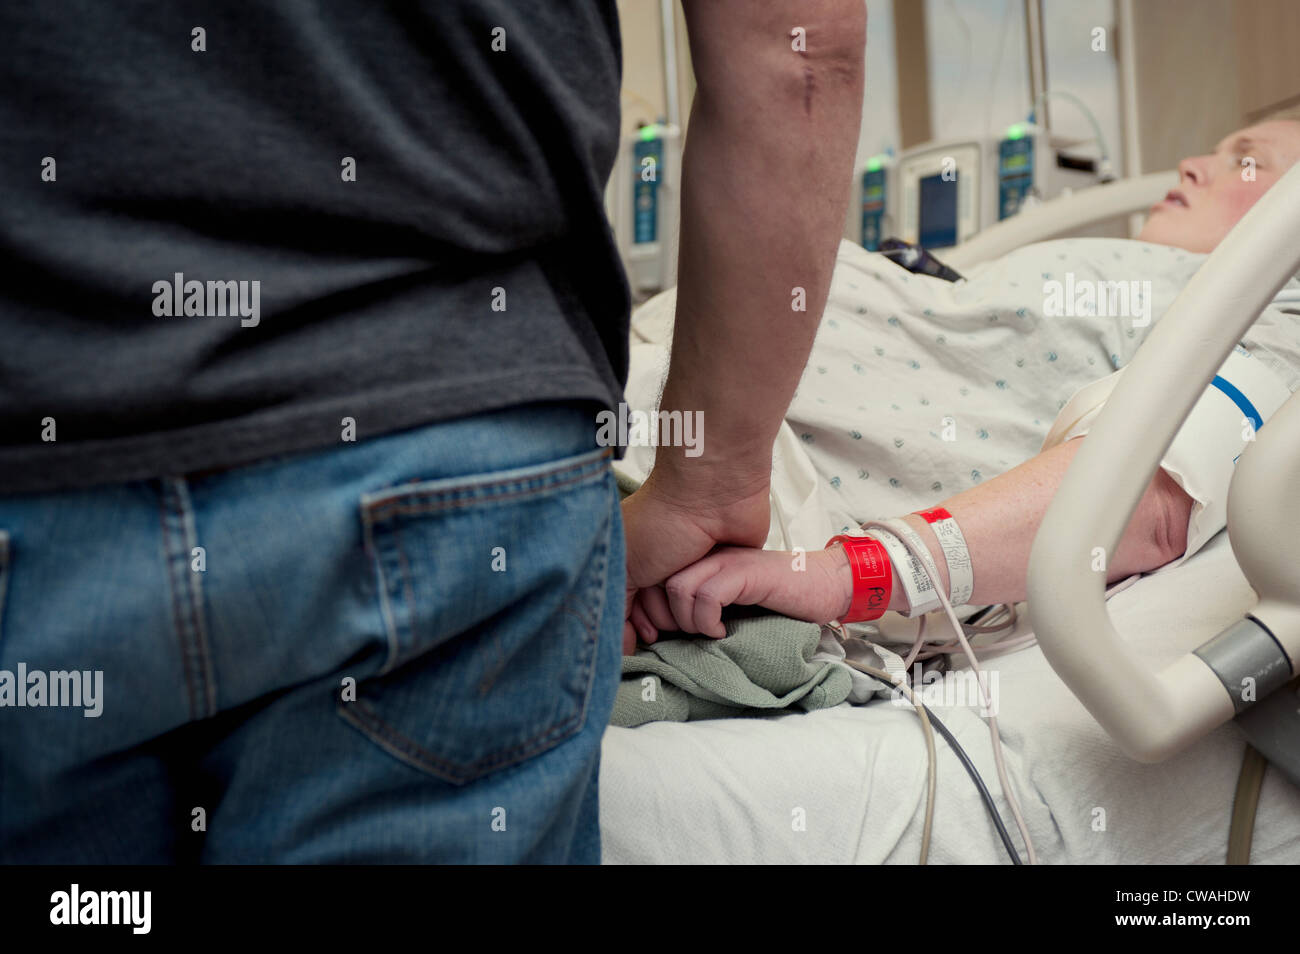 Man holding woman's hand in hospital room Stock Photo